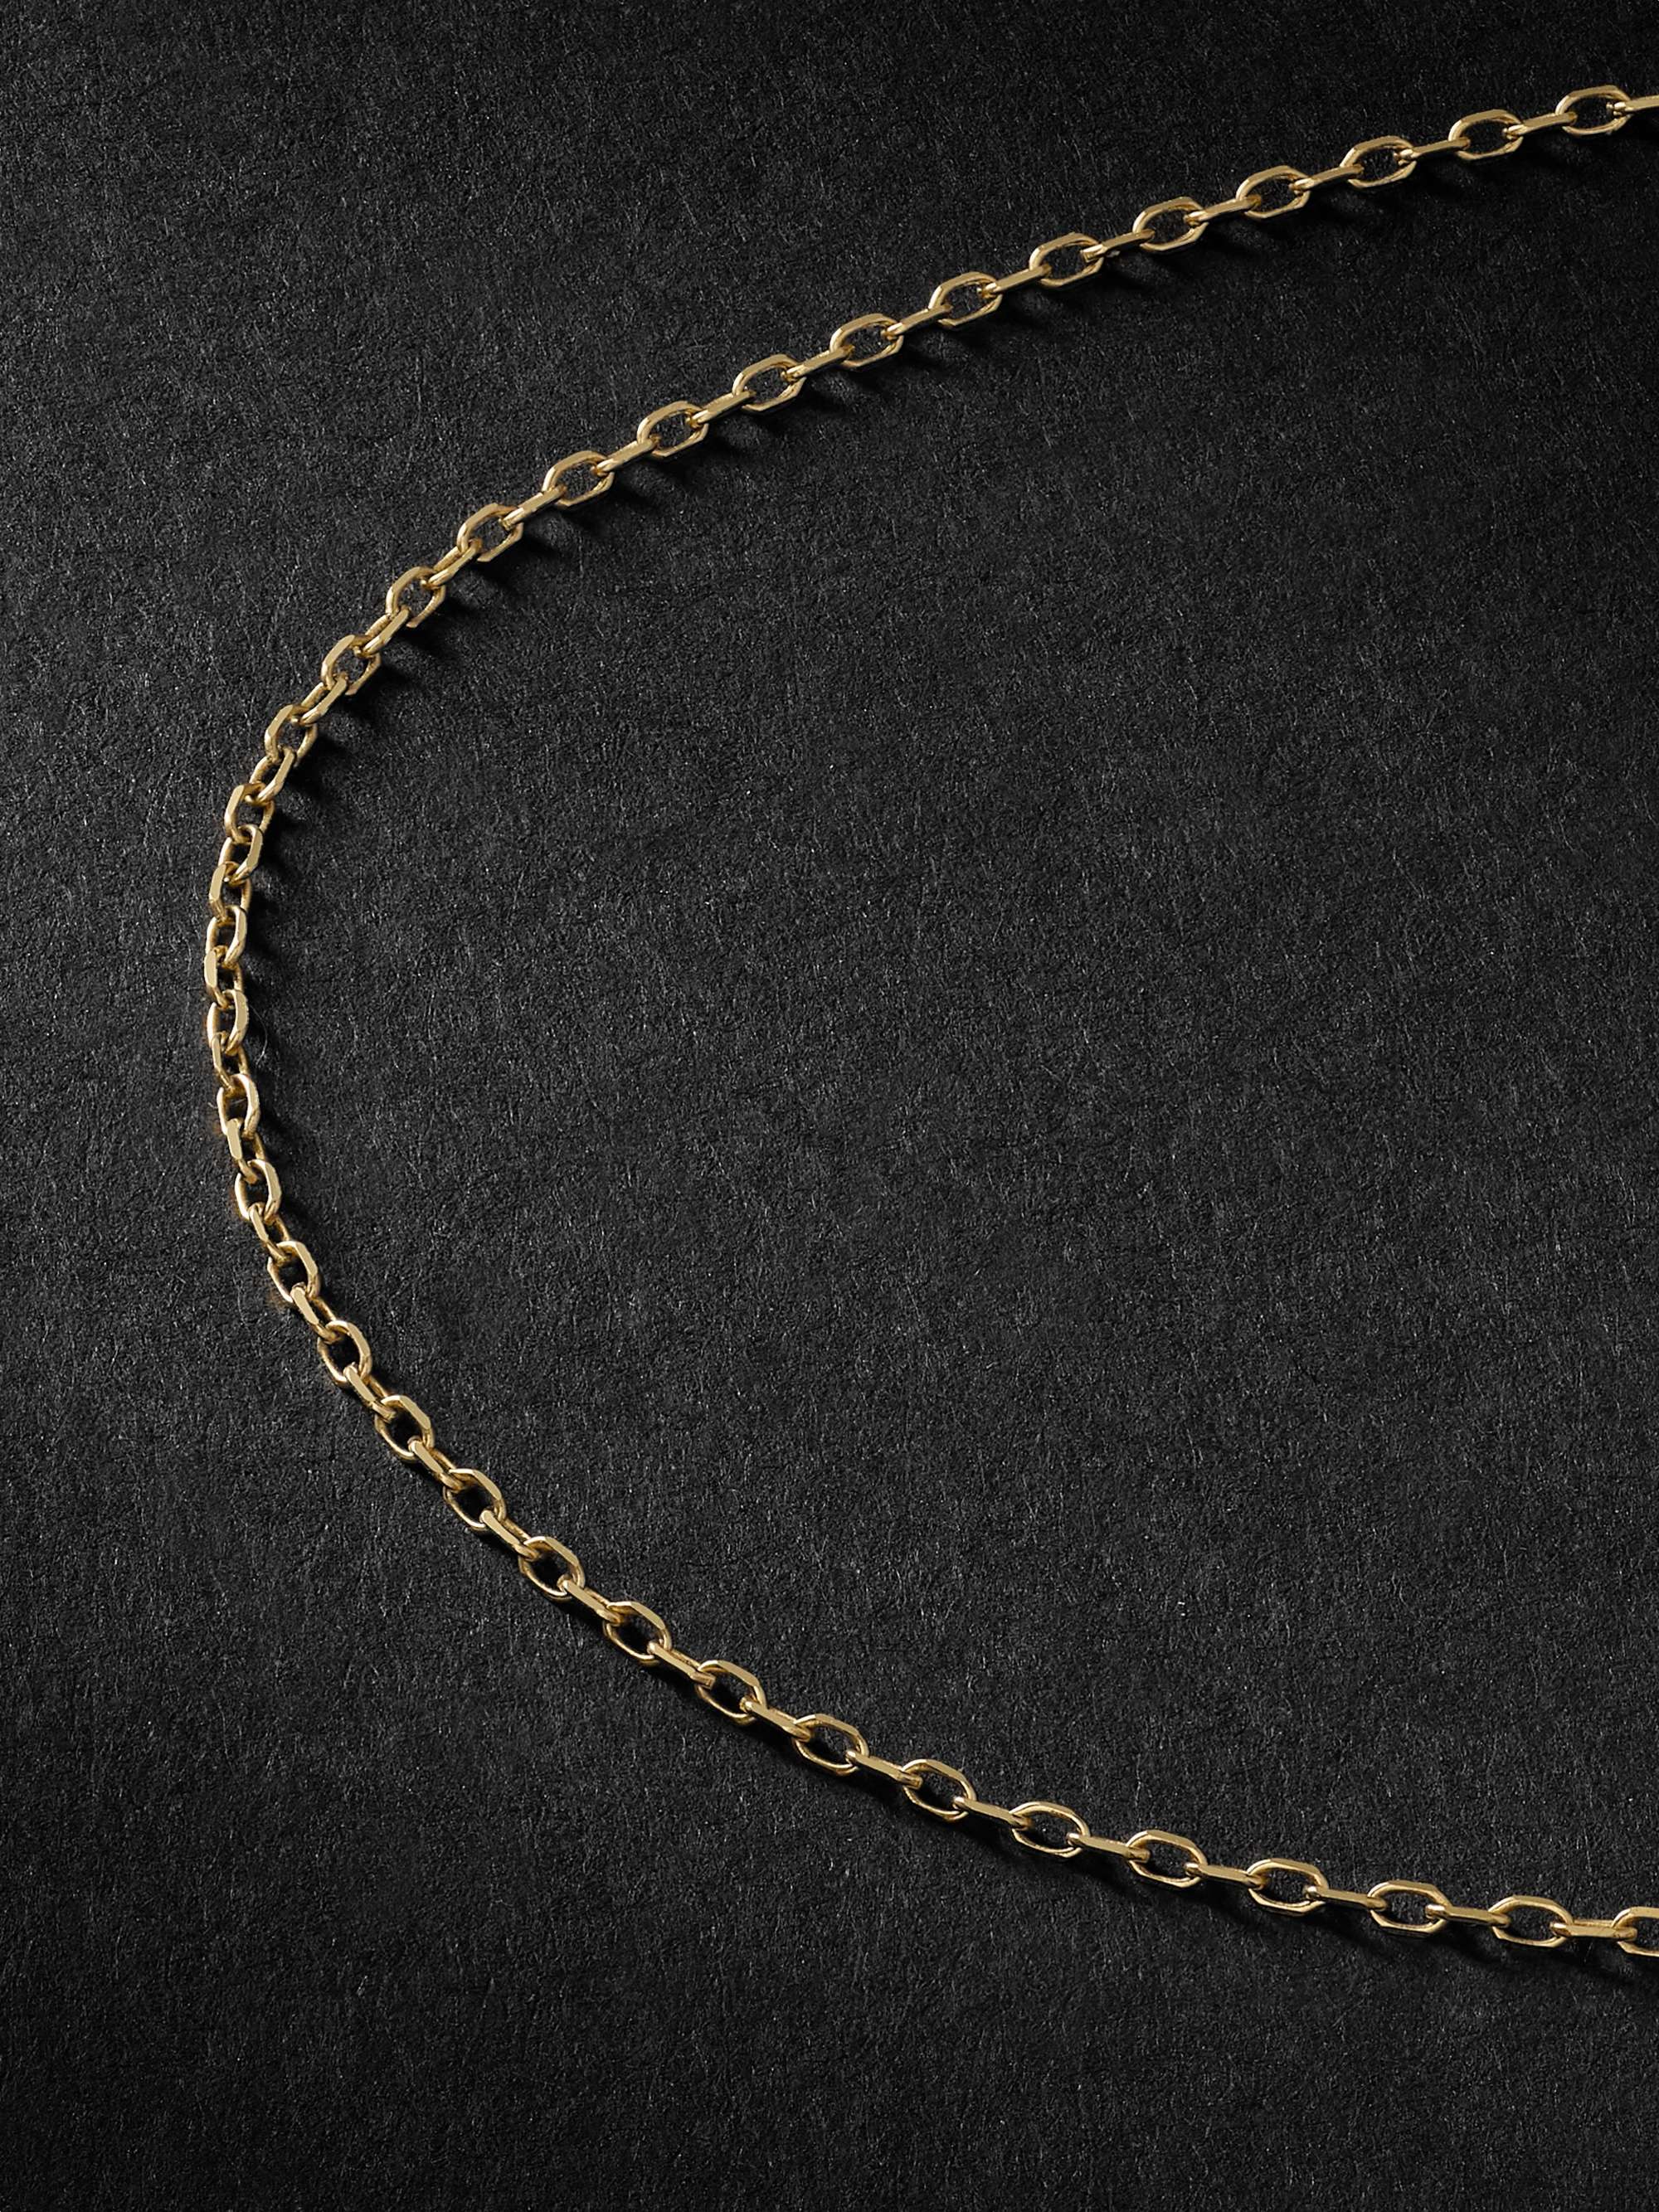 MATEO Gold Chain Anklet